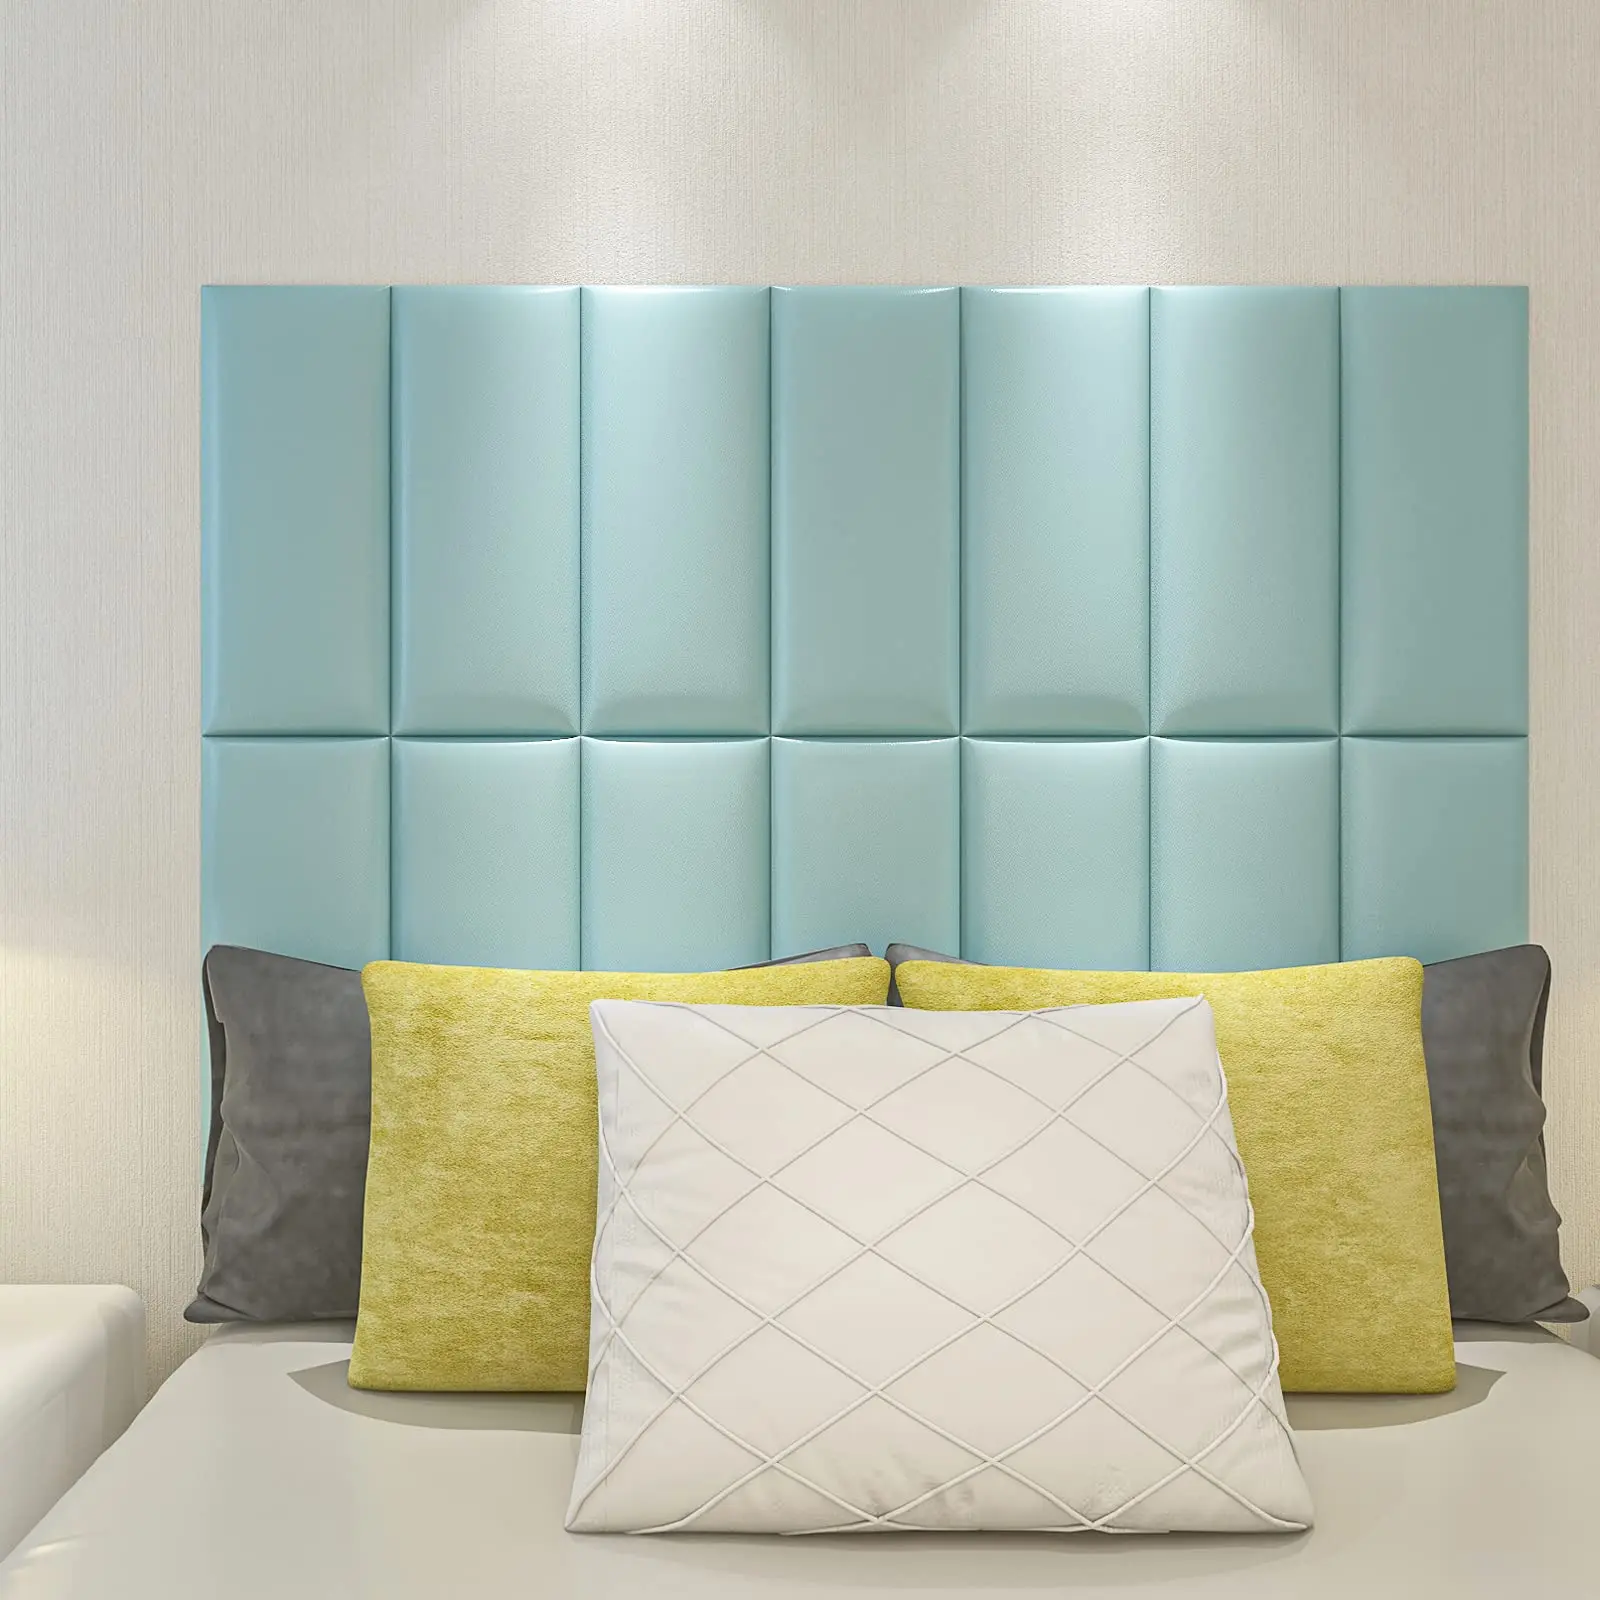 Art3d 9PCS Peel and Stick Headboard for Twin in Teal, Sized 25 x 60cm , 3D Upholstered Wall Panels art3d 4pcs peel and stick headboard for twin in grey sized 25 x 60cm 3d upholstered wall panels